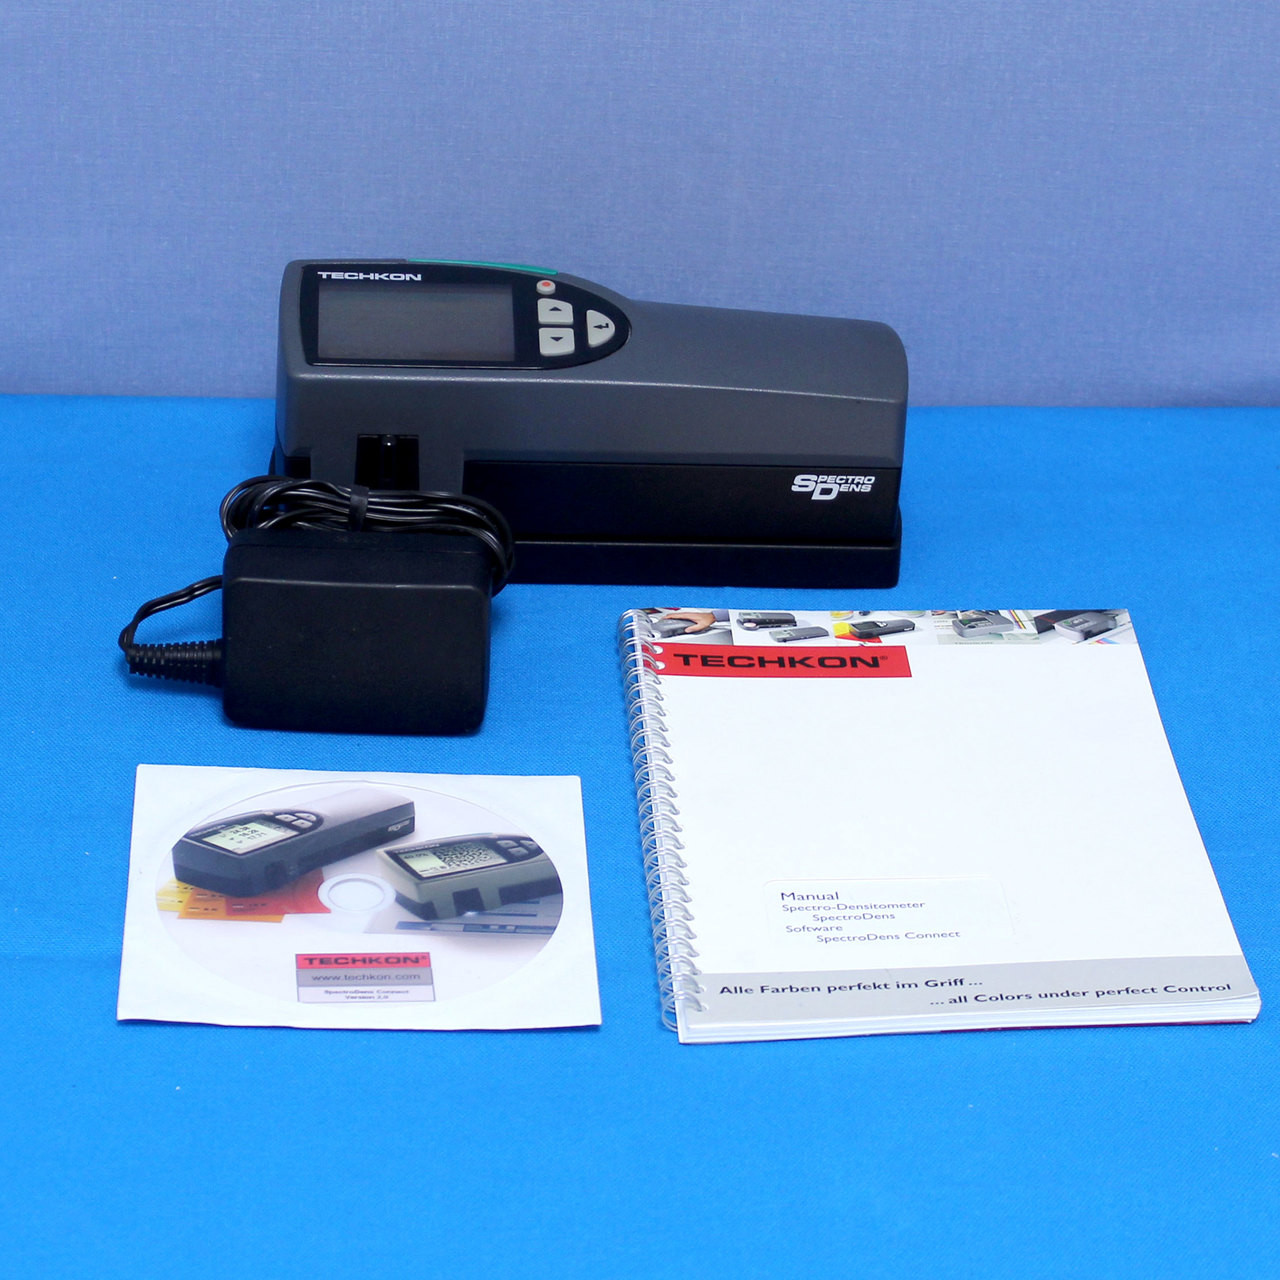 Techkon SpectroDens Premium Spectro-Densitometer Fully Loaded with Carrying Case 